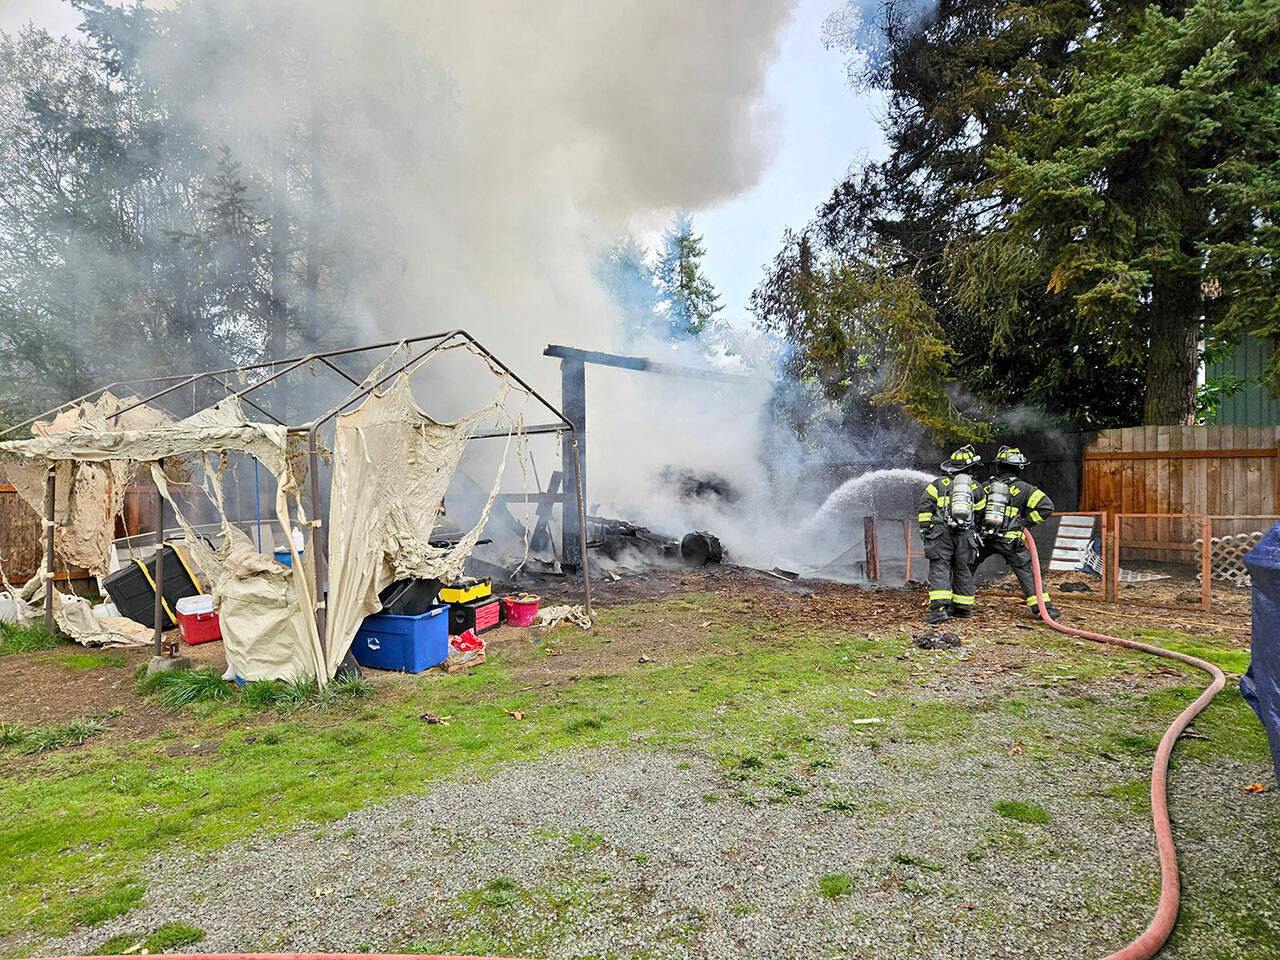 A shed fire was extinguished early Friday morning. Chief Jake Patterson said firefighters knocked down the flames in about 10 minutes. The district responded with two fire engines, one ambulance and two chief officers. The Port Angeles Fire Department responded with one fire engine and one chief officer, along with Port Angeles police officers and Clallam County Sheriff’s deputies. (Clallam 2 Fire-Rescue)